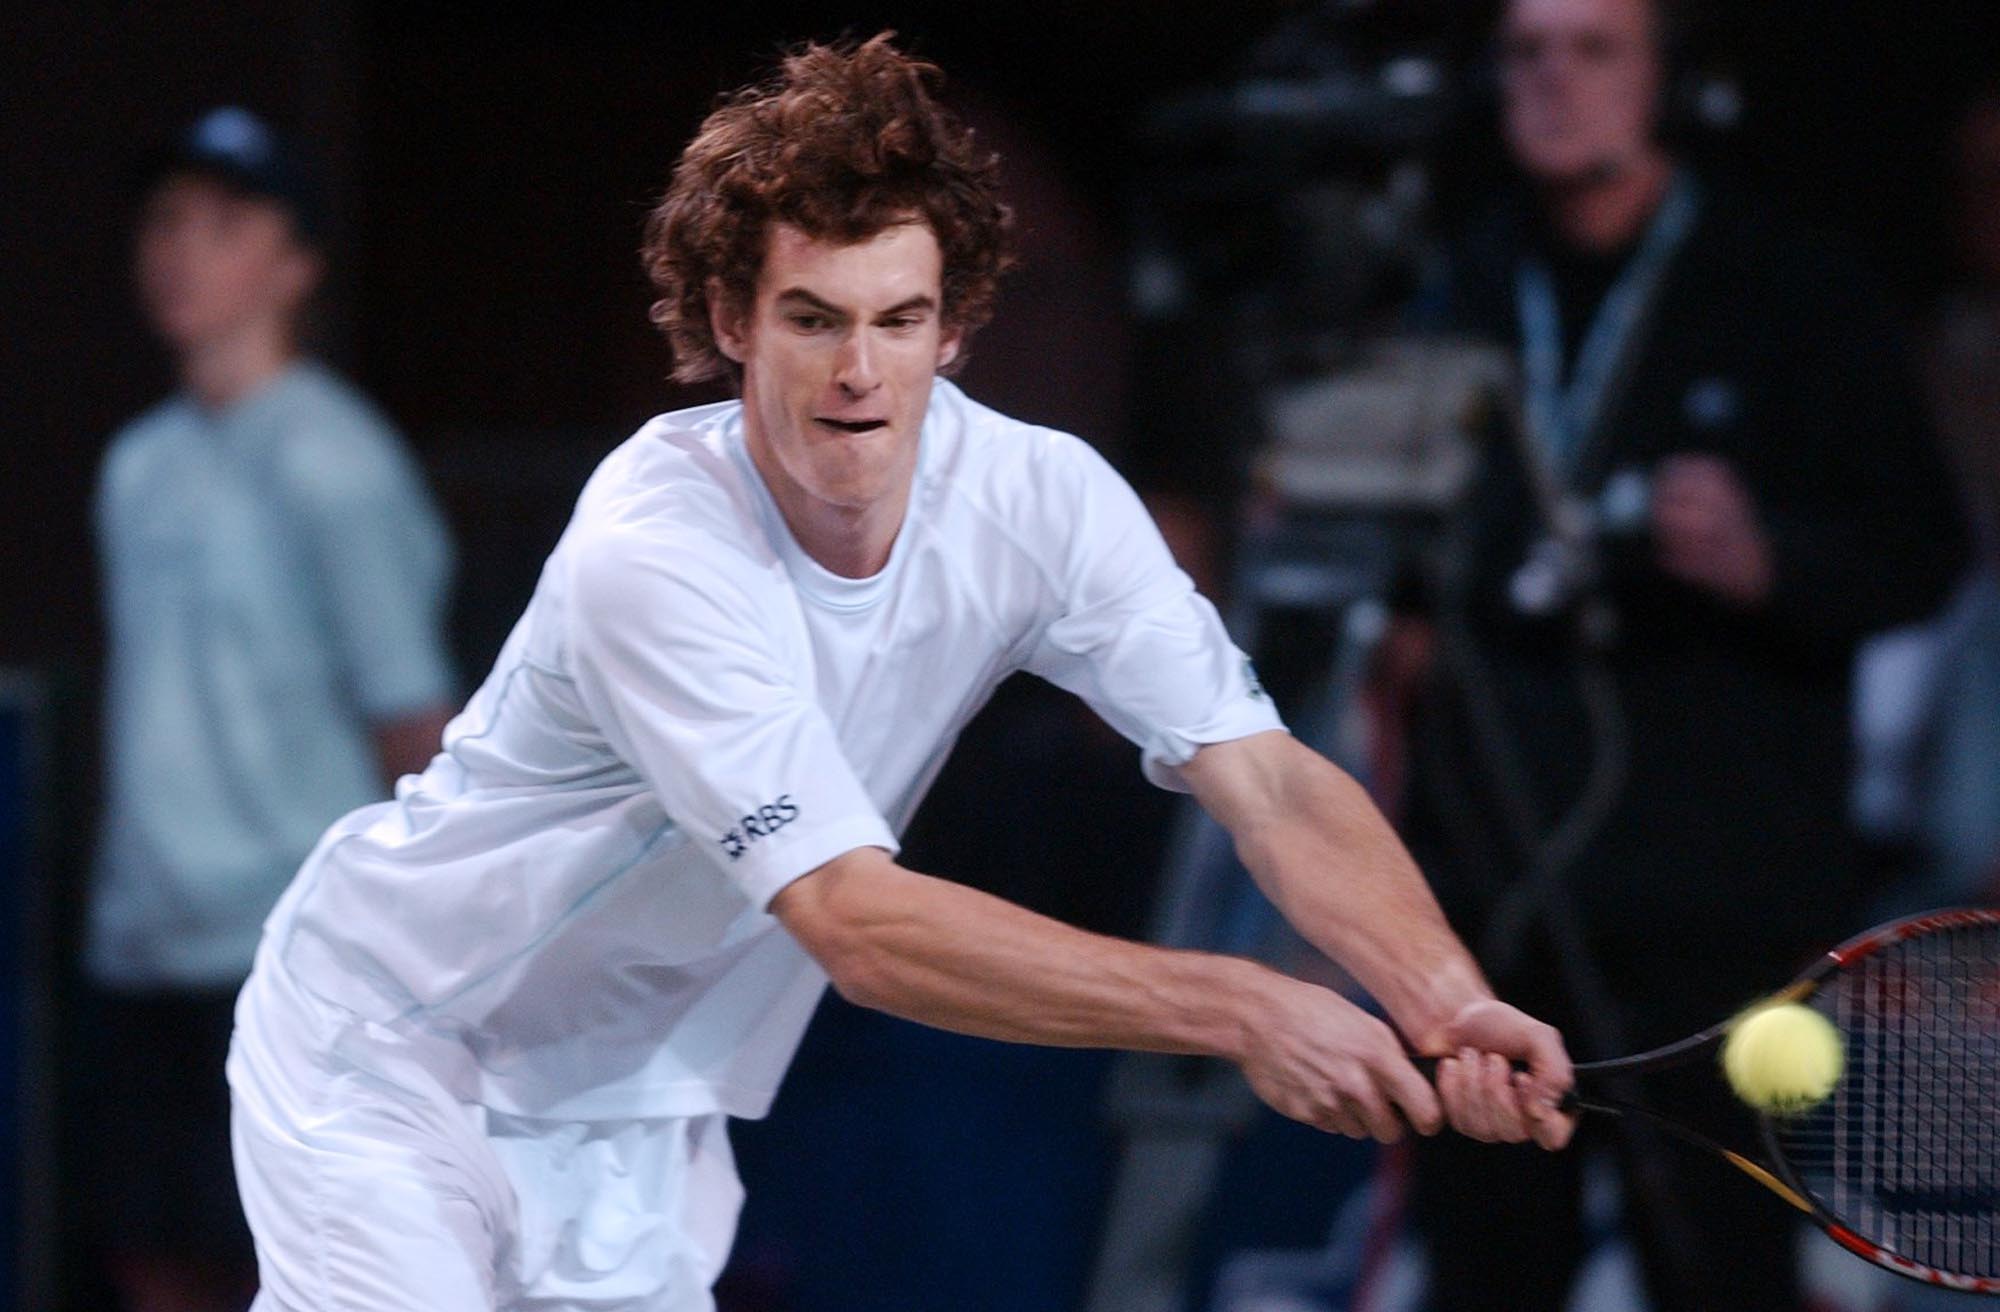 Andy Murray competing in Aberdeen in November 2005.